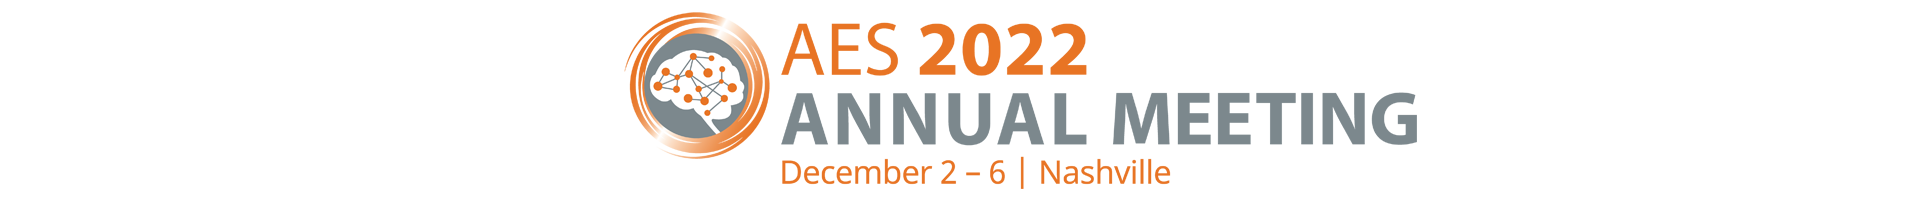 AES 2022 Annual Meeting Event Banner